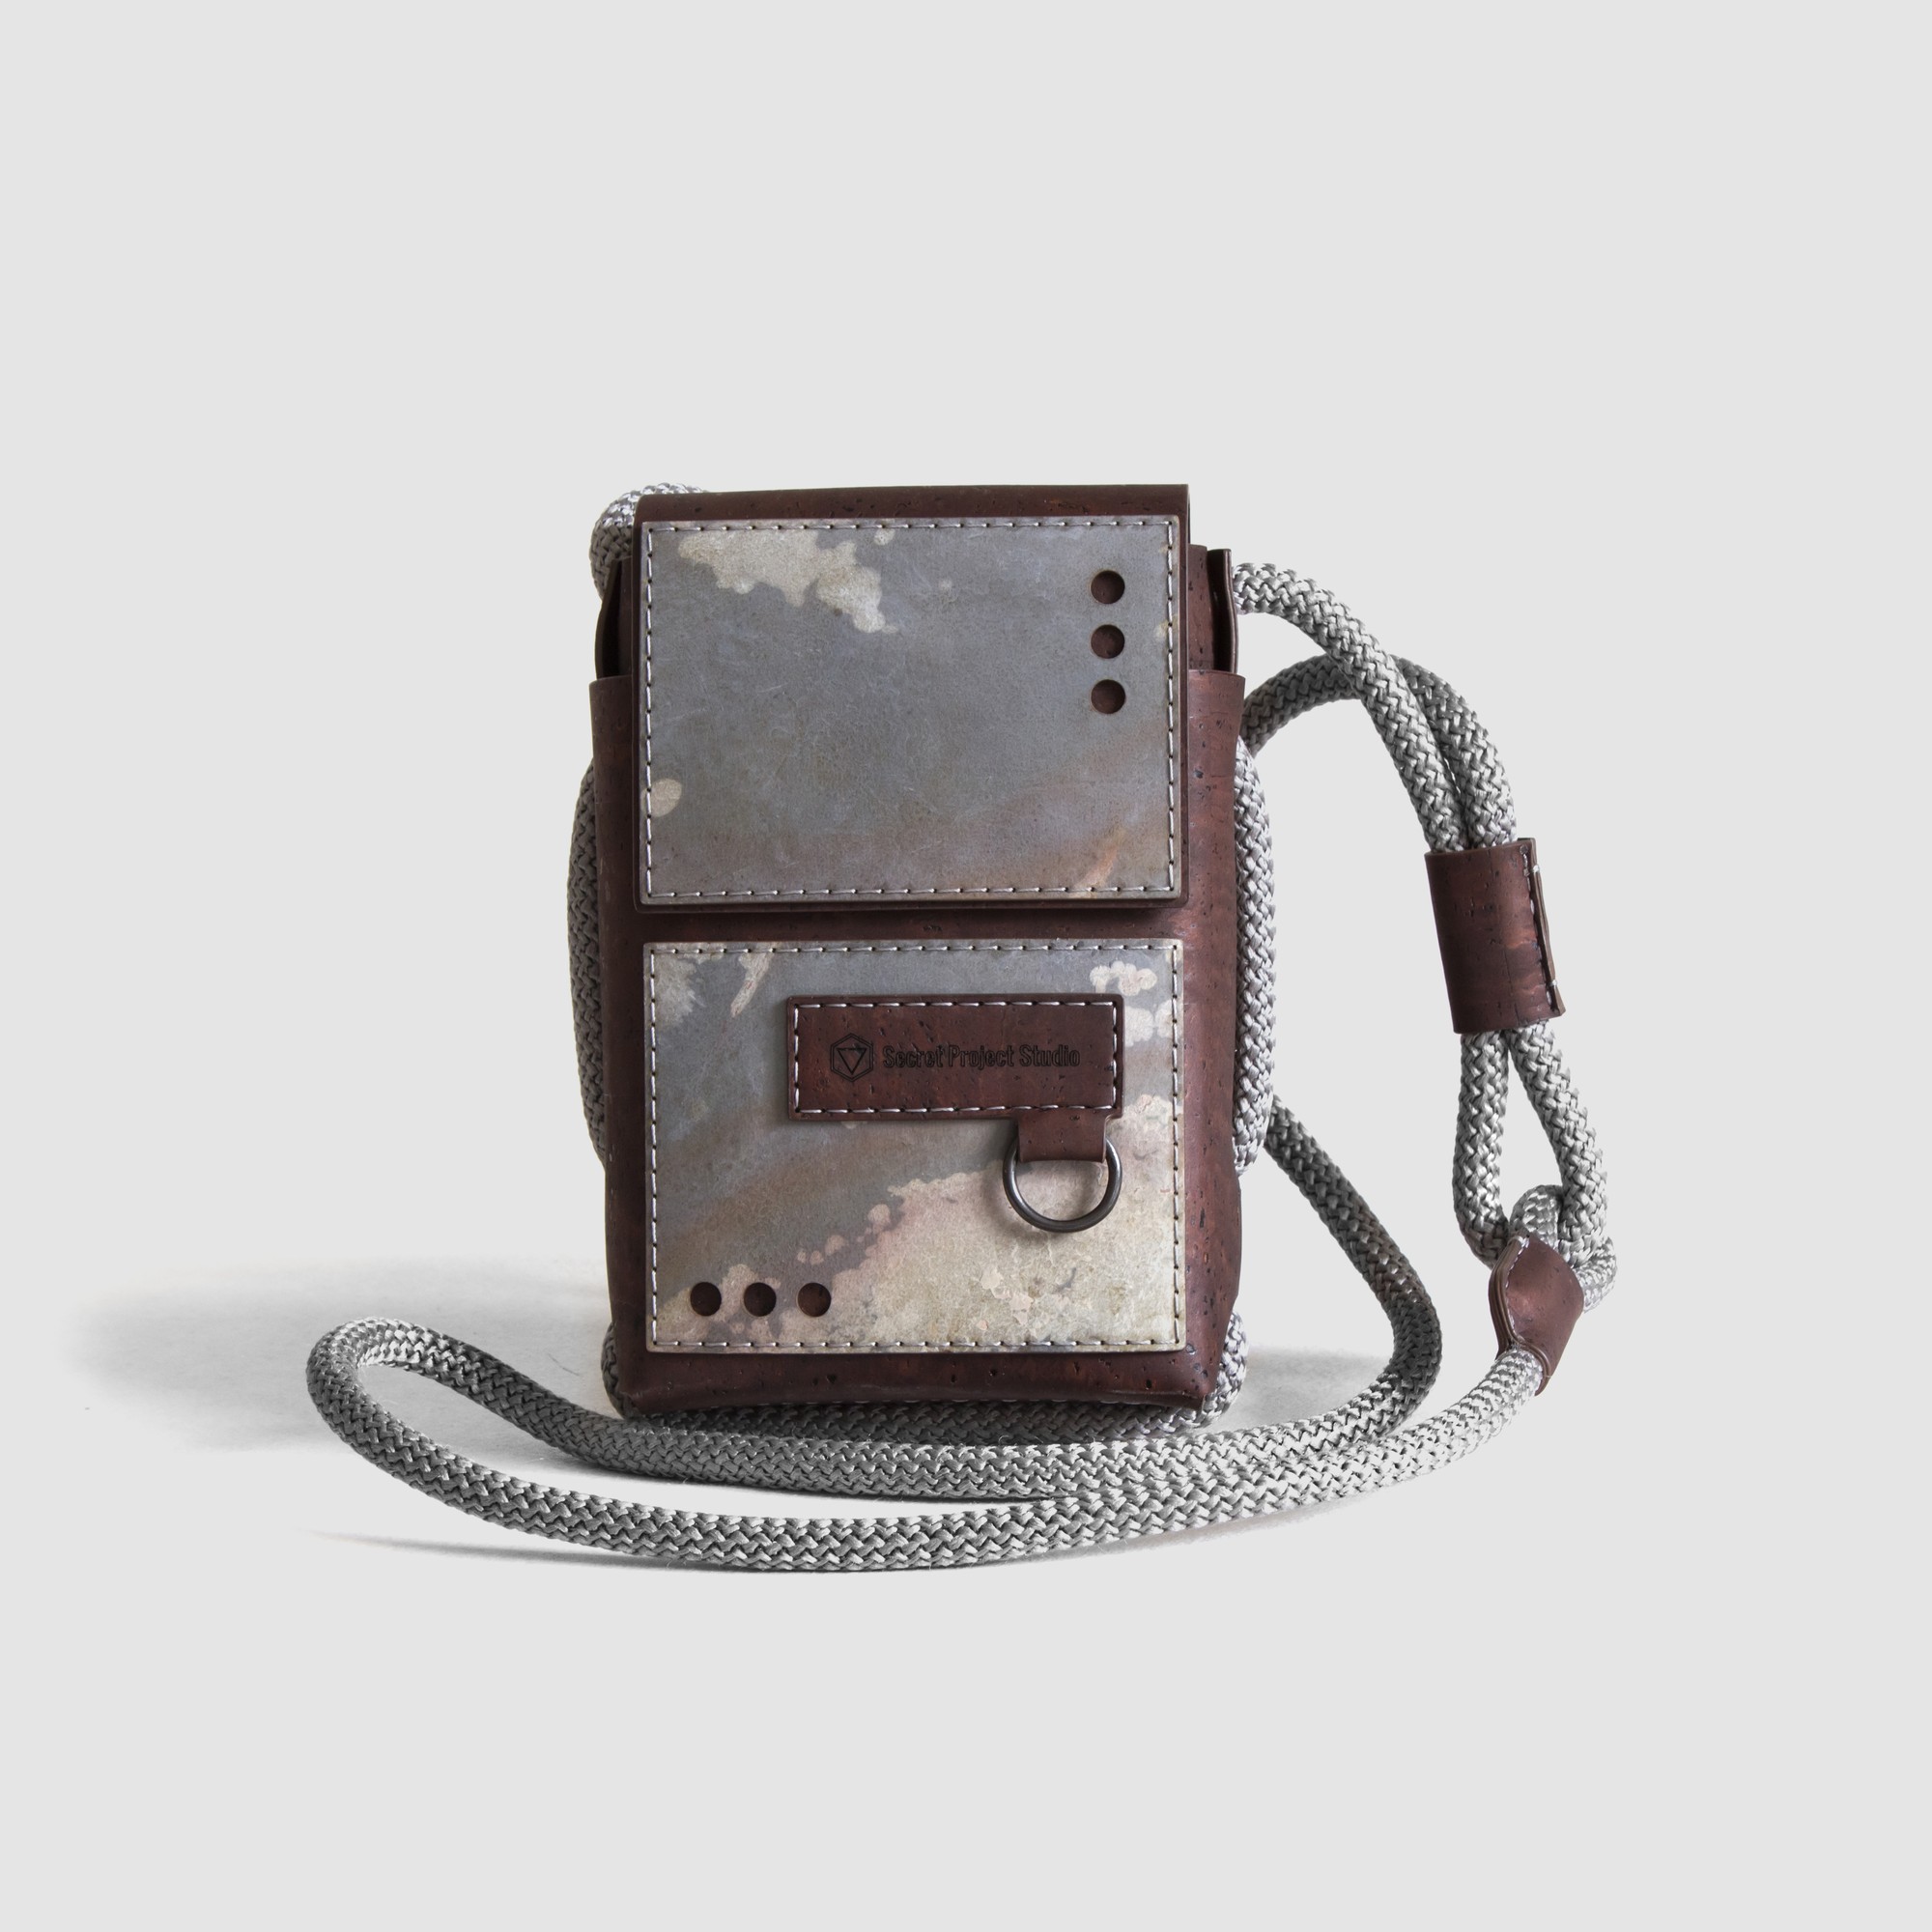 Protego S ME - small vegan crossbody bag made from brown cork and fallen leaves stone